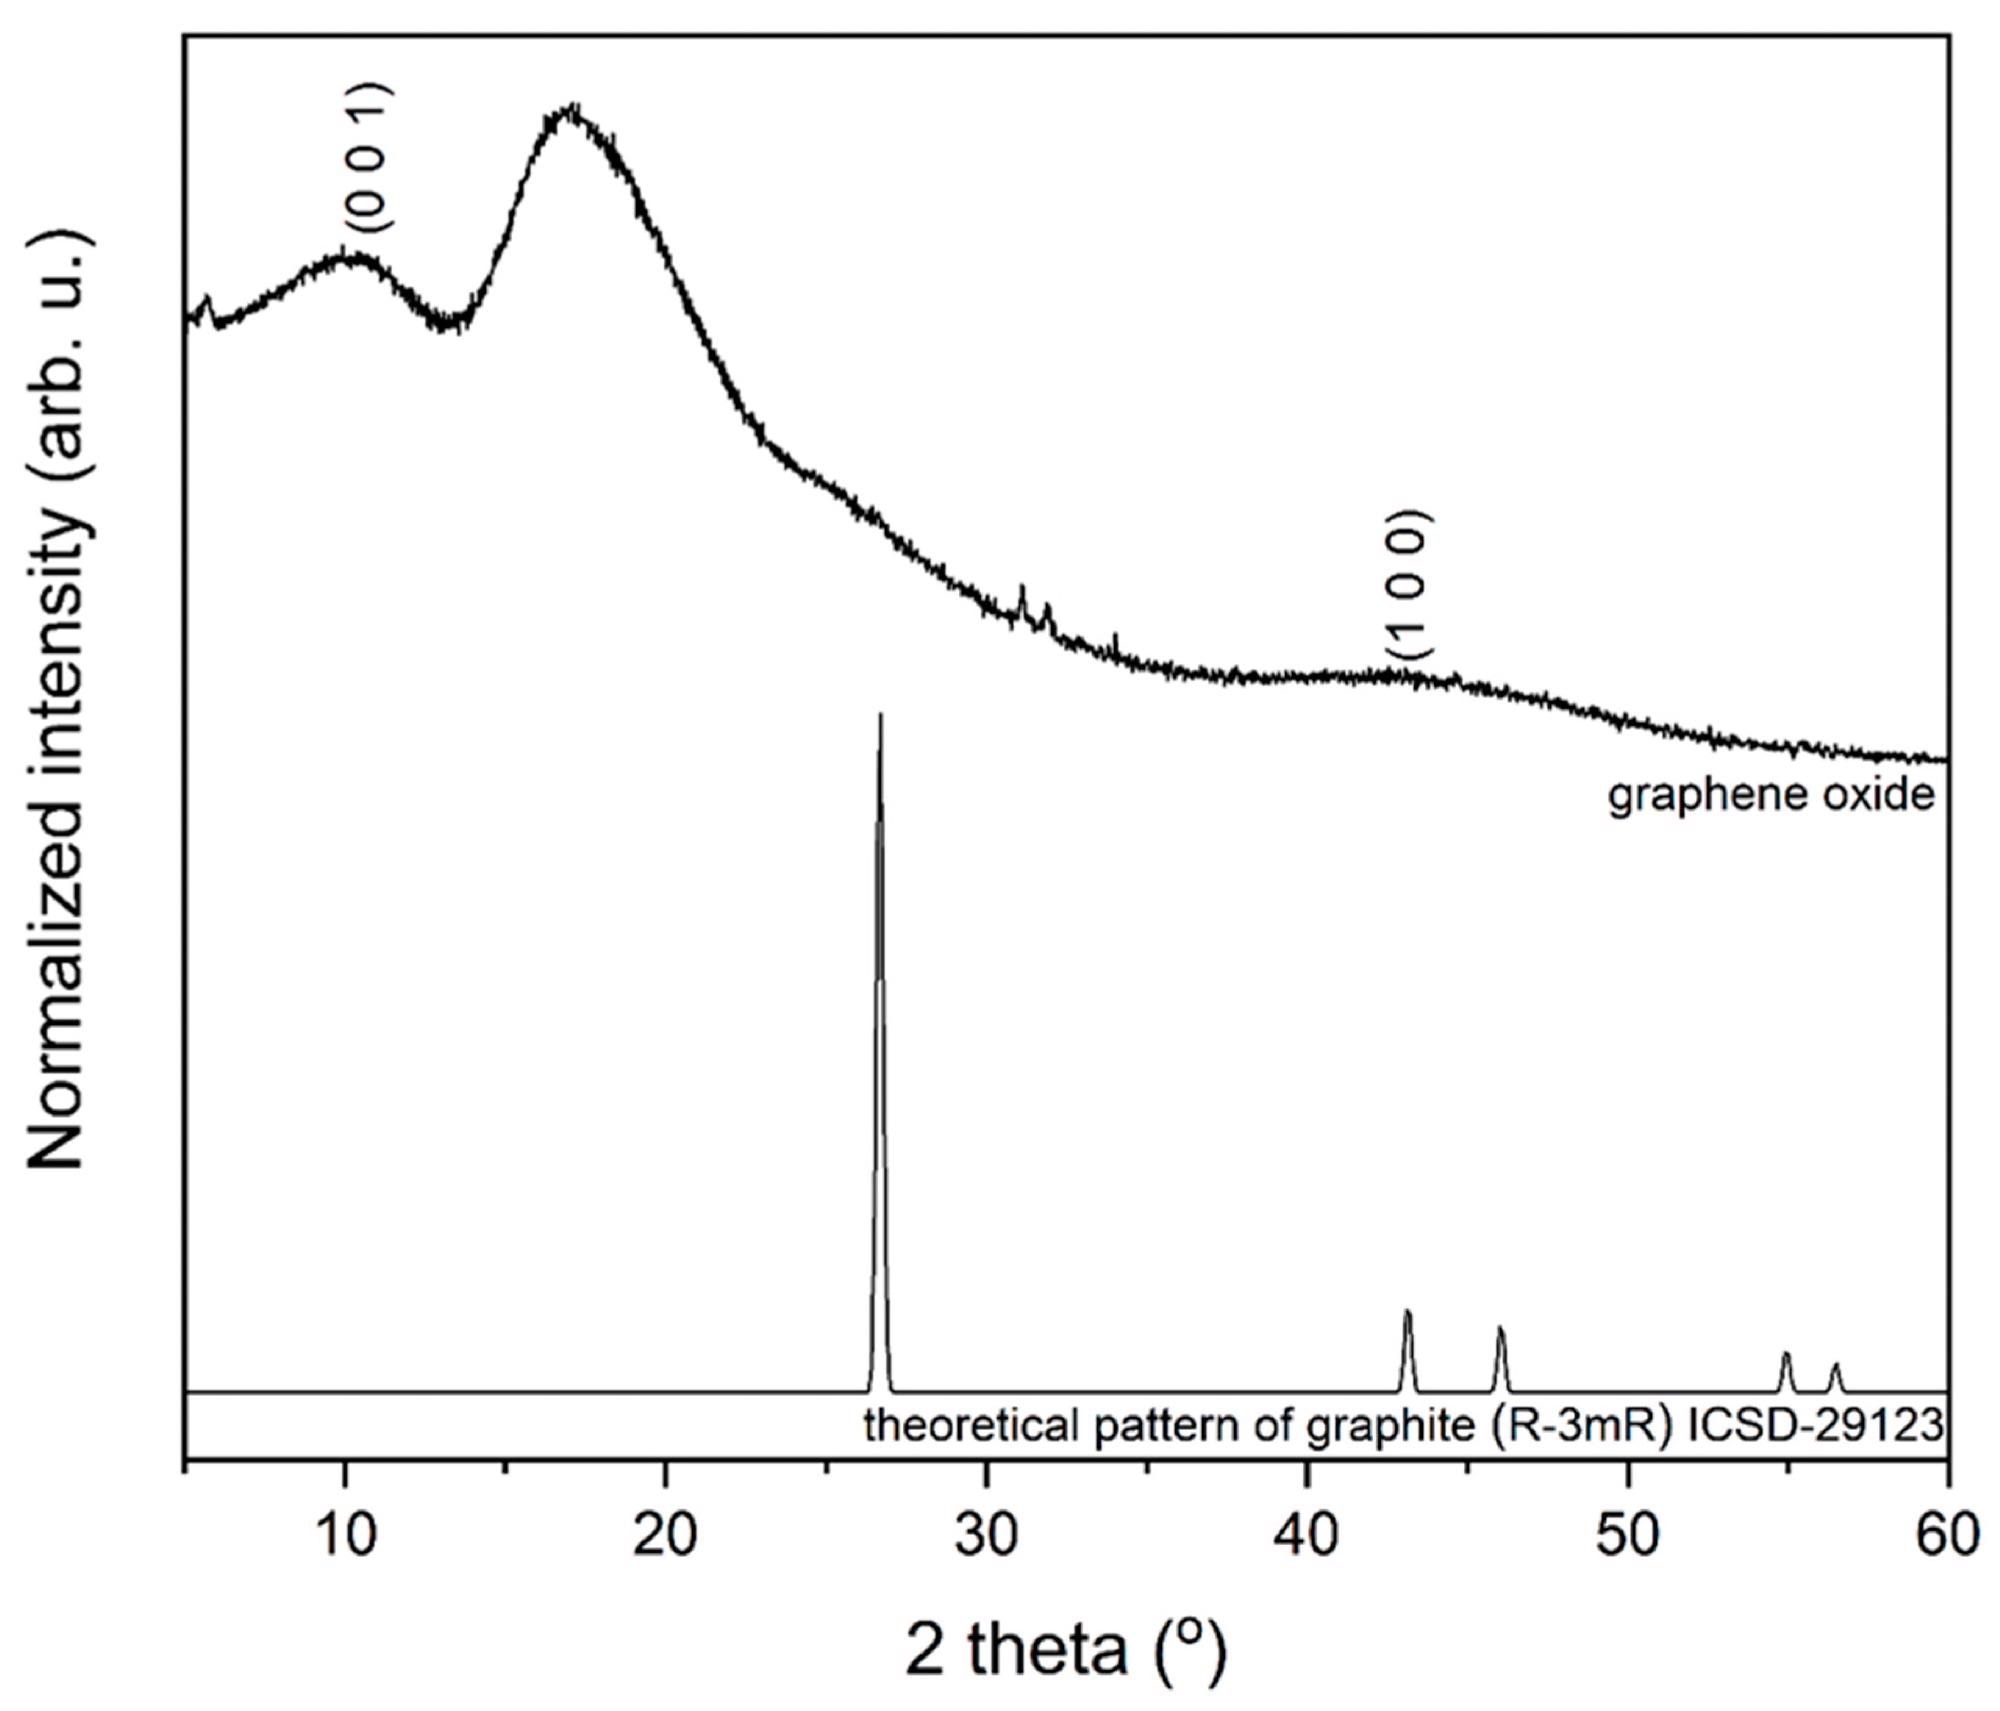 XRD patterns of obtained graphene oxide material (above) compared to the reference pattern of graphite.